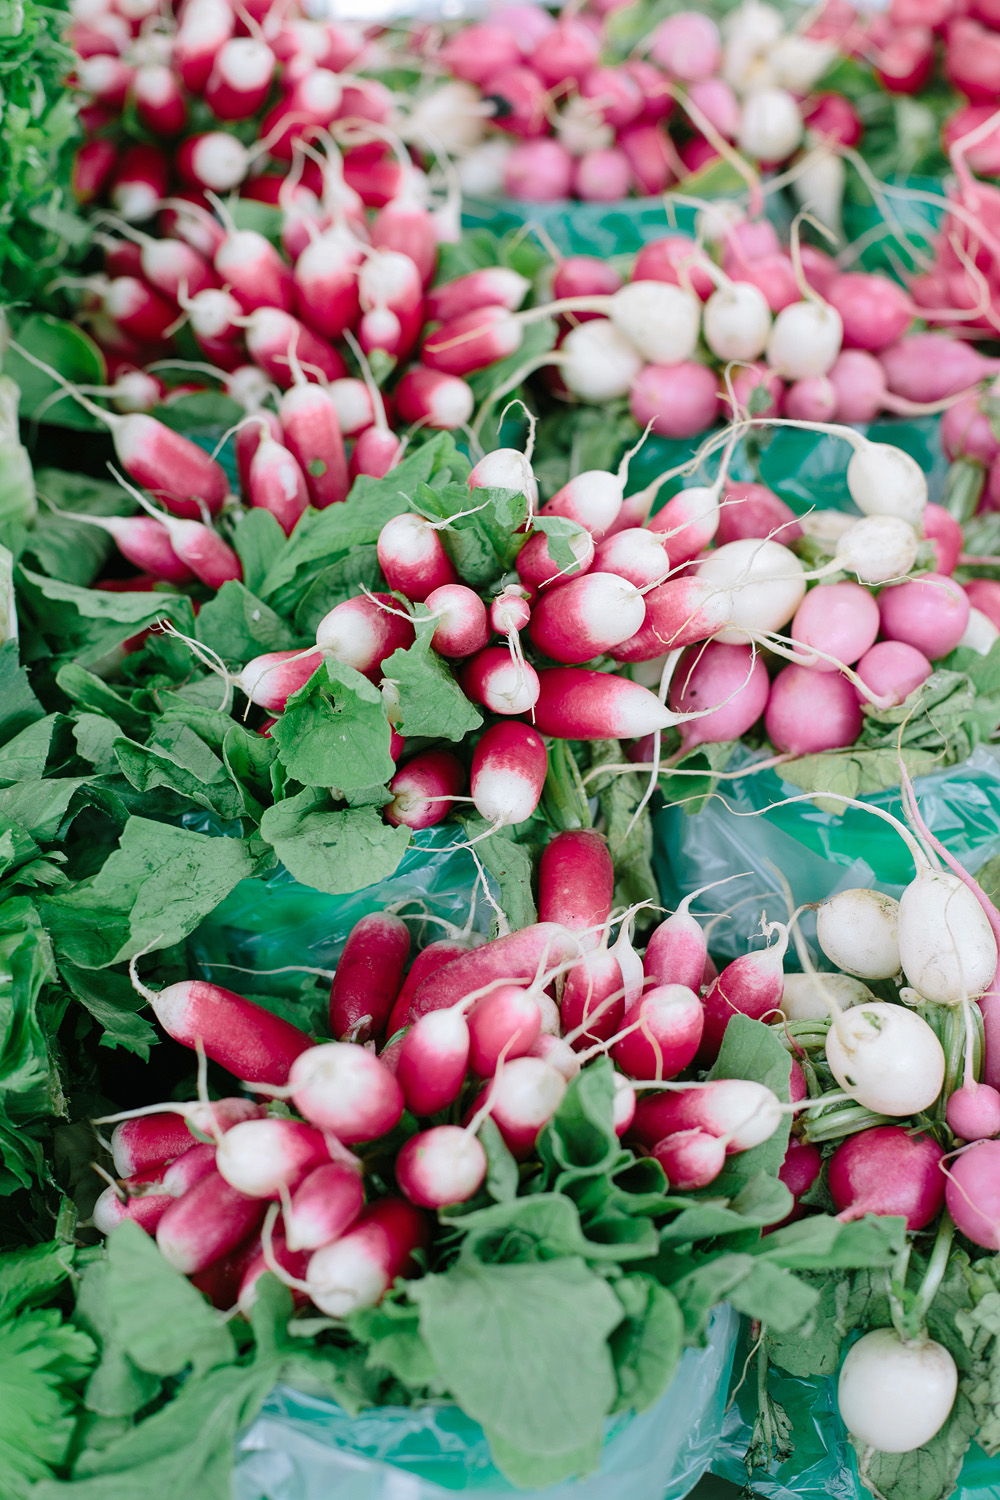 Radishes in Montreal